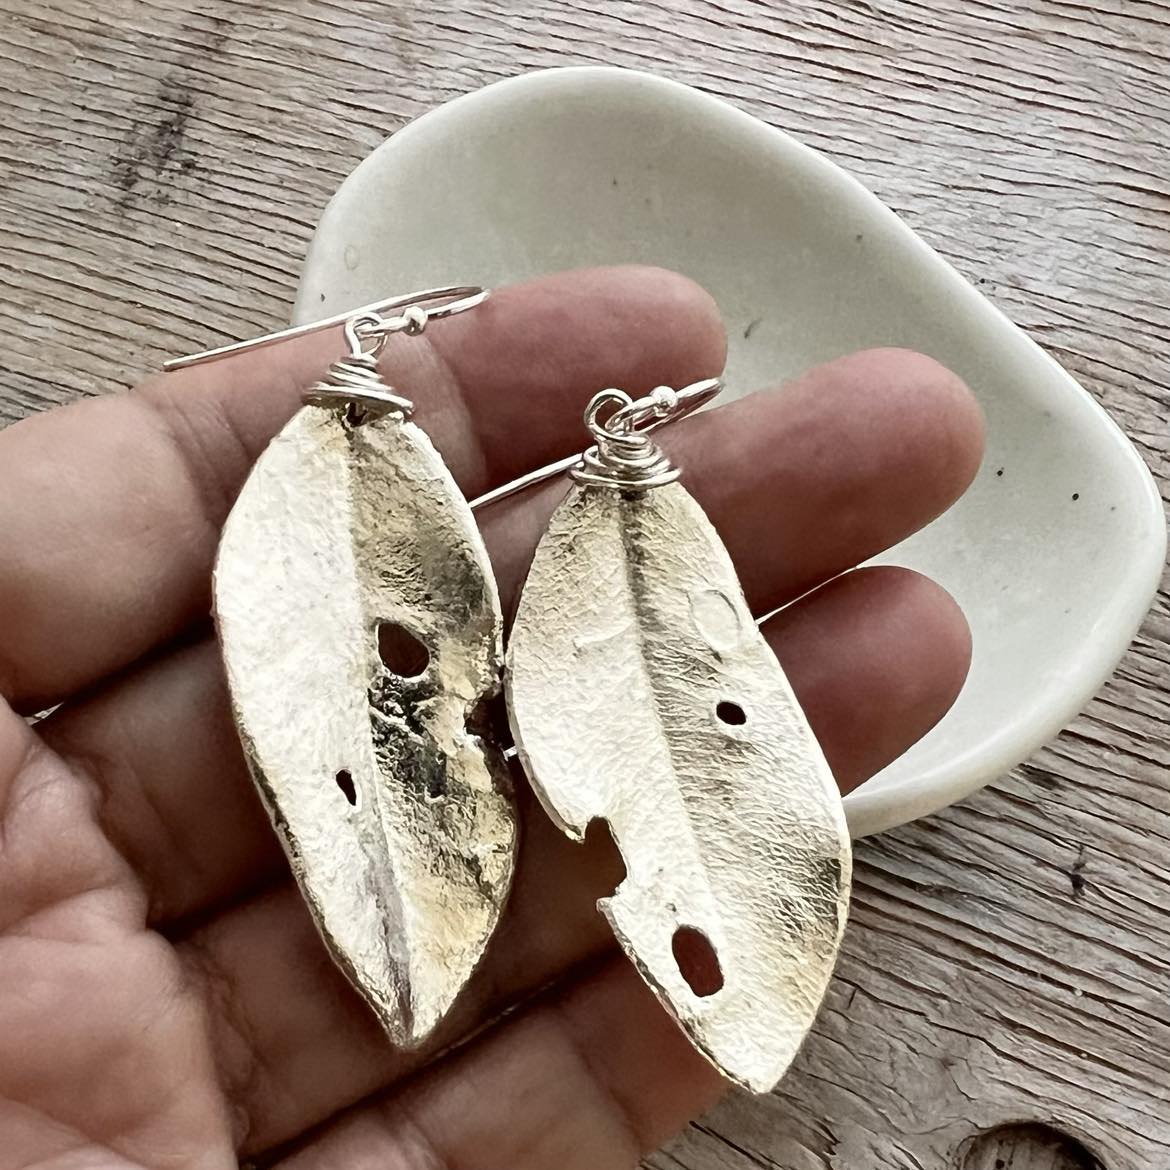 Pohutukawa Leaf With Holes Perfect Imperfection Earrings